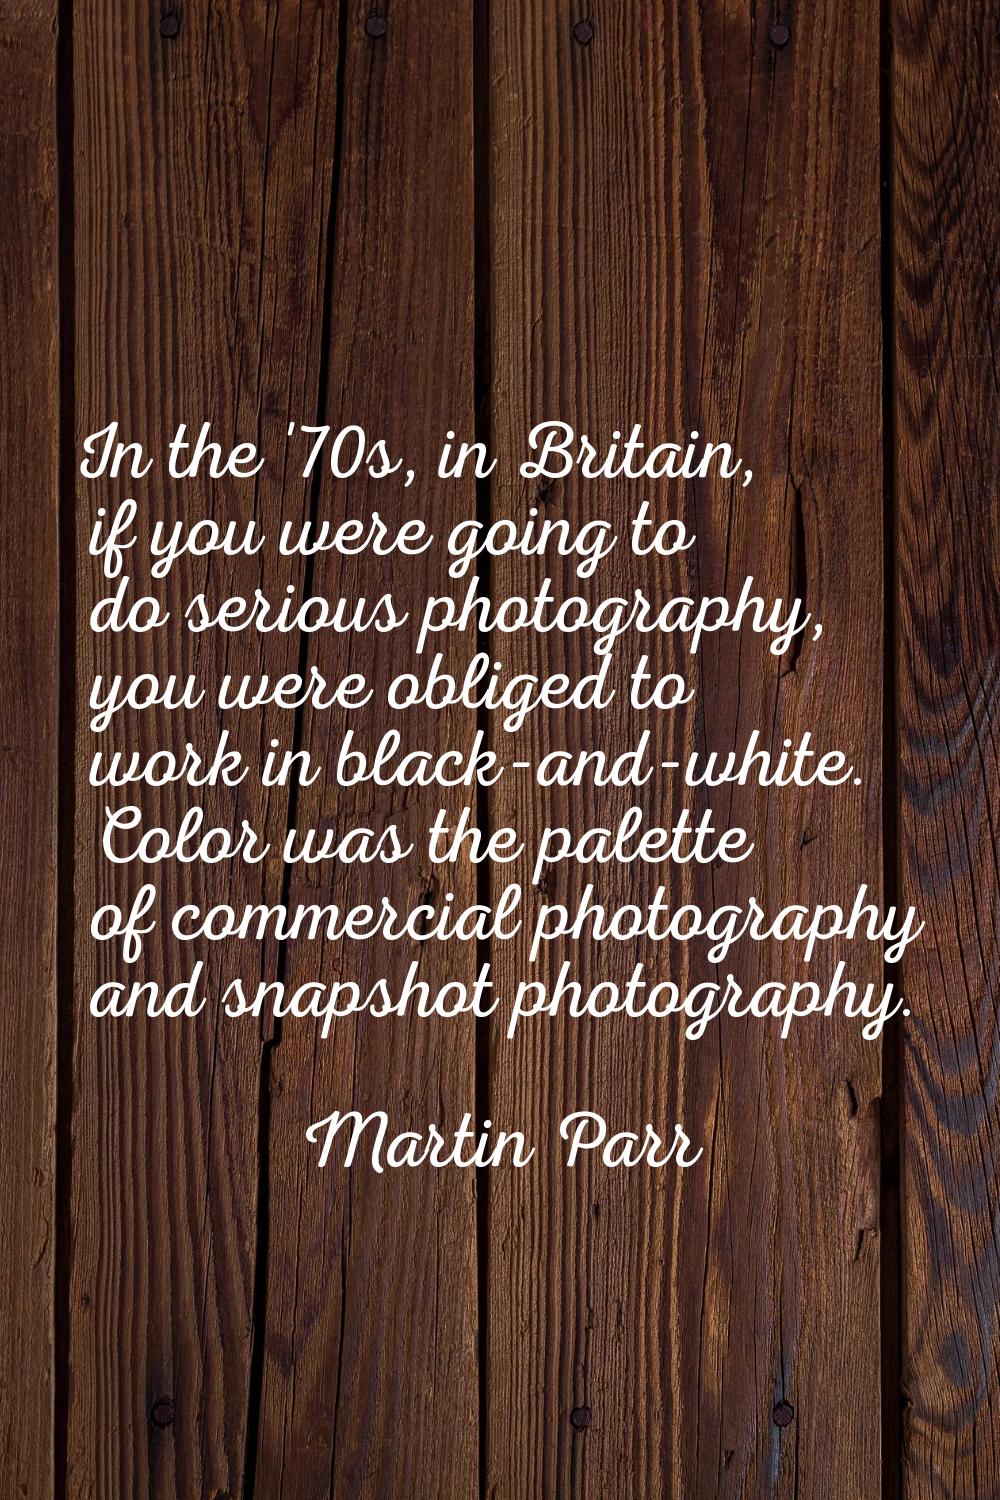 In the '70s, in Britain, if you were going to do serious photography, you were obliged to work in b